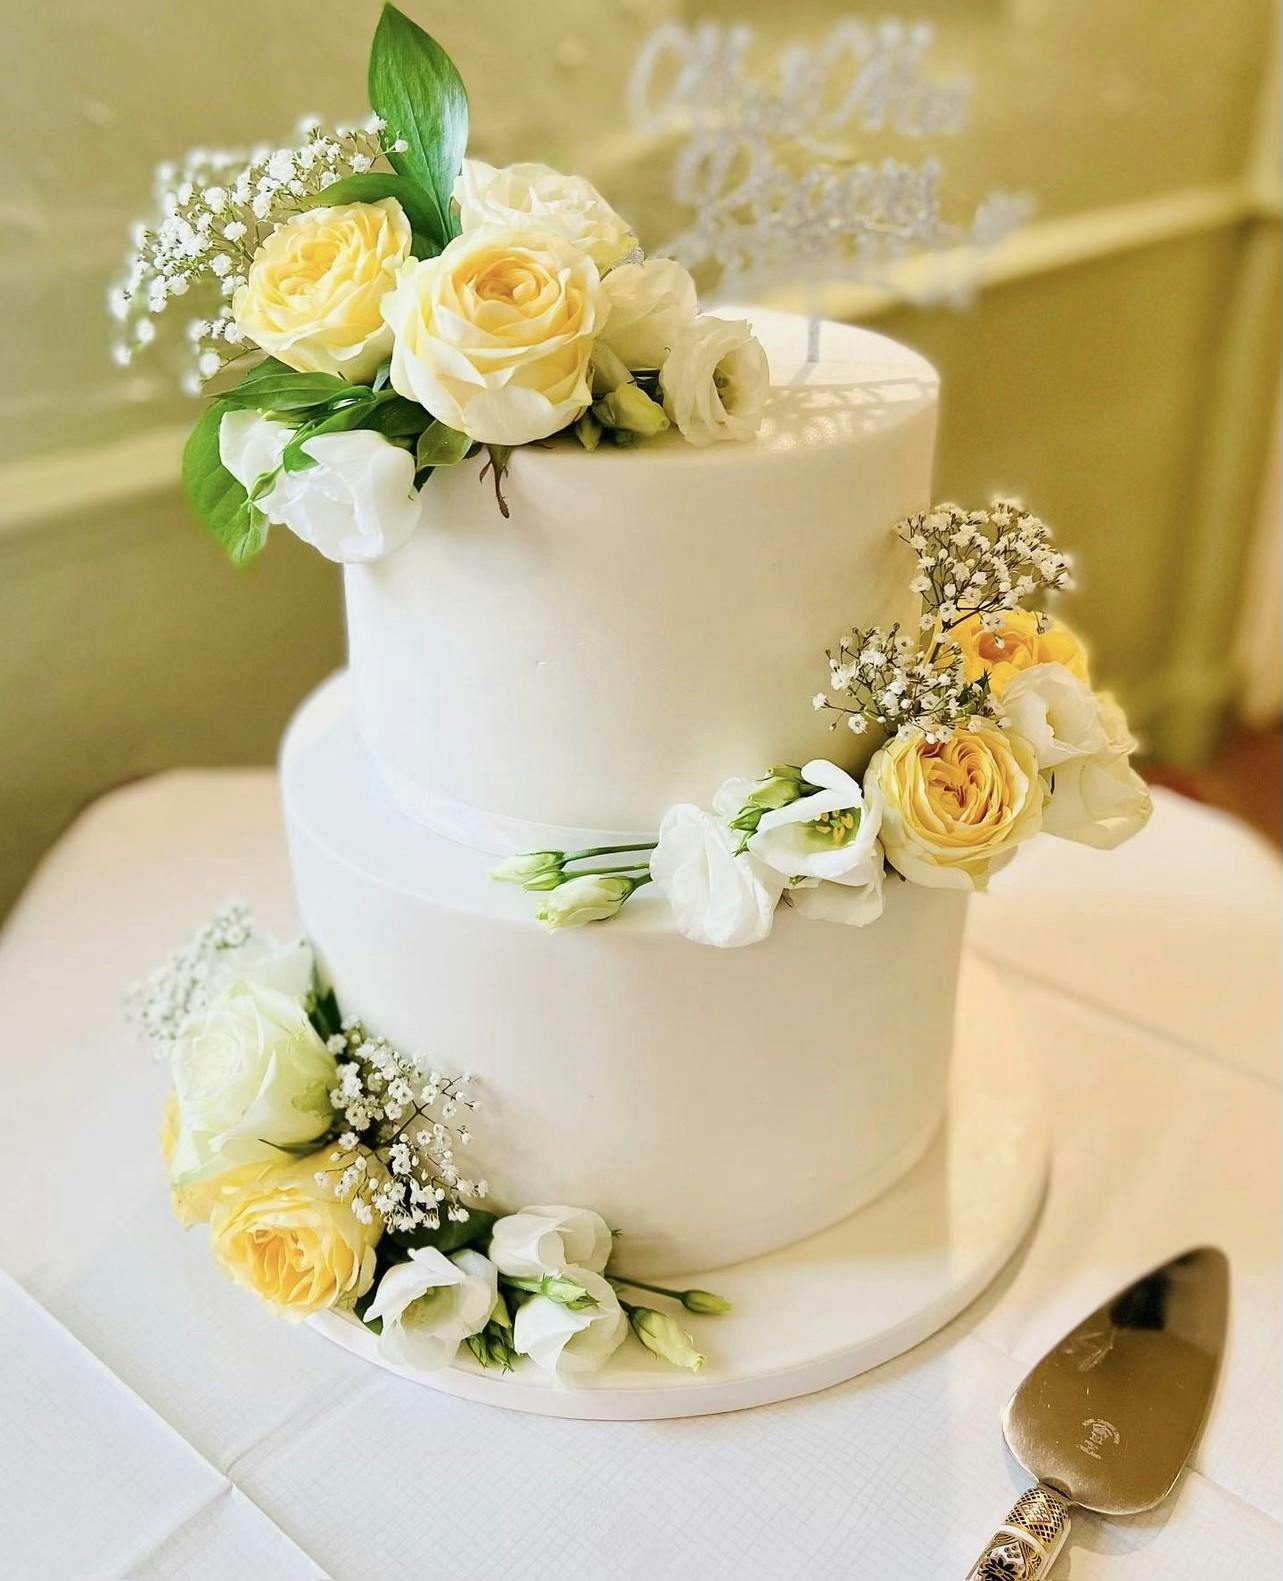 White wedding cake with yellow and white flowers